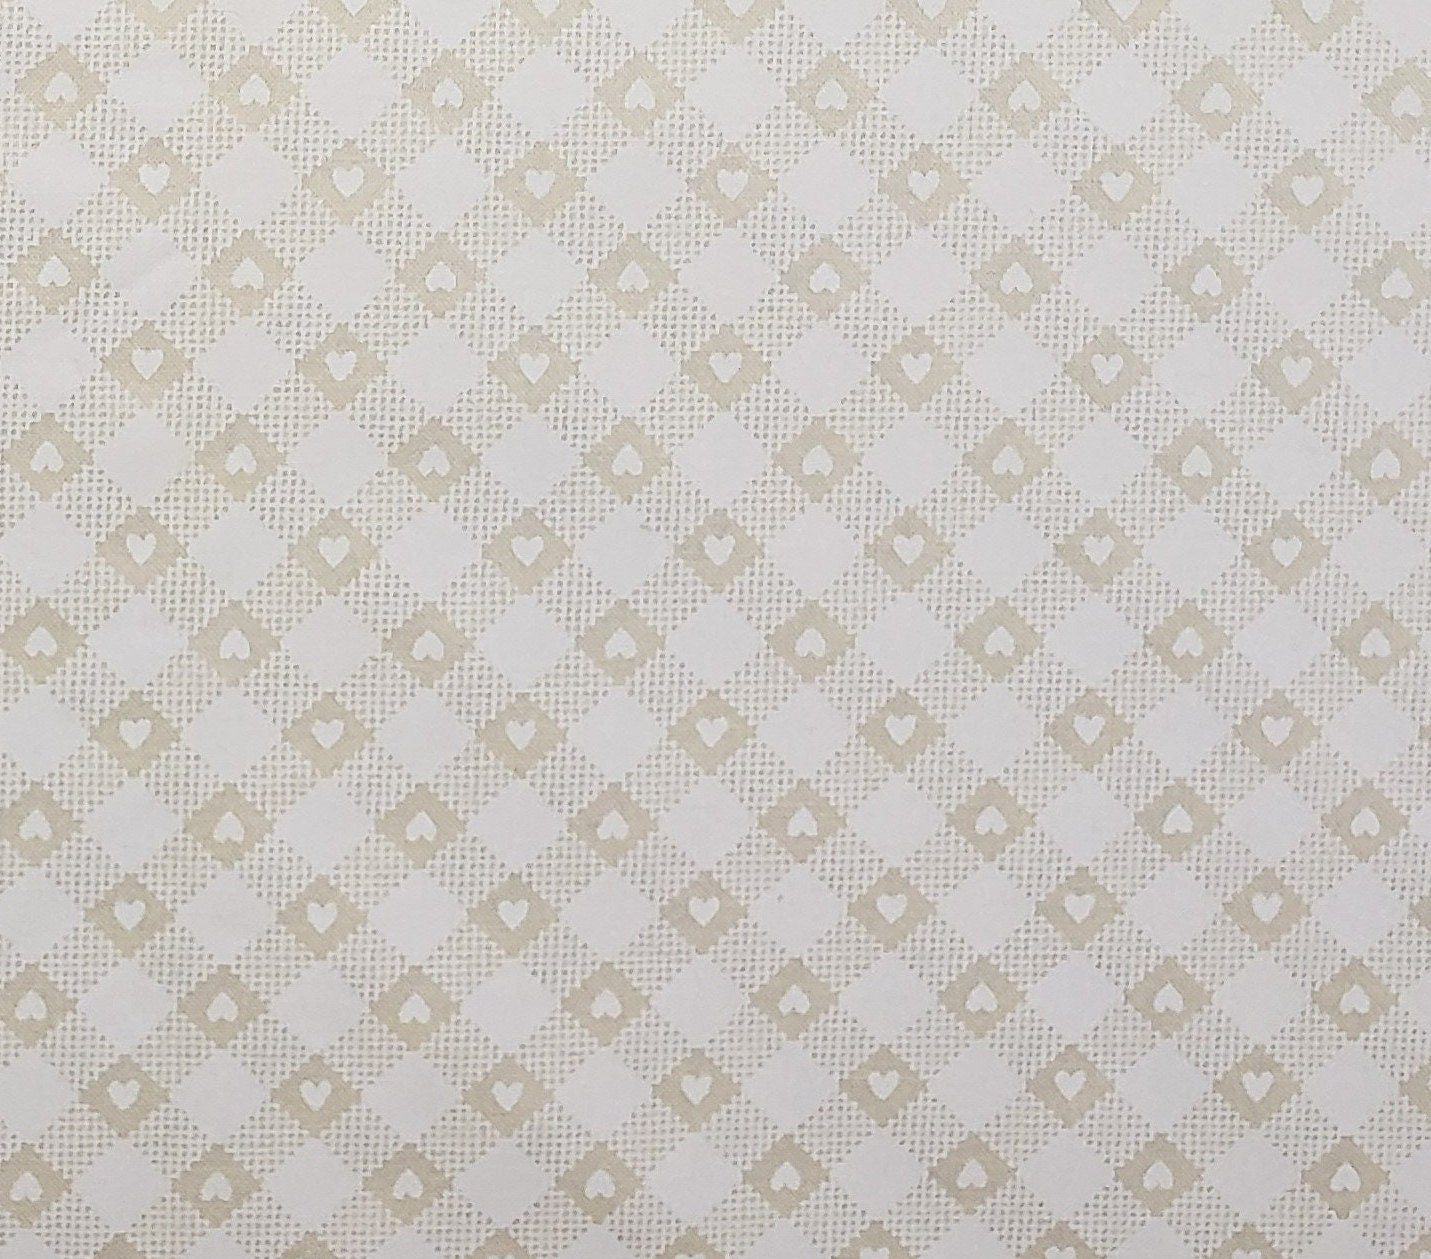 Fabric Traditions 1993 - Cream Fabric with Darker "Gingham" Pattern with White Hearts